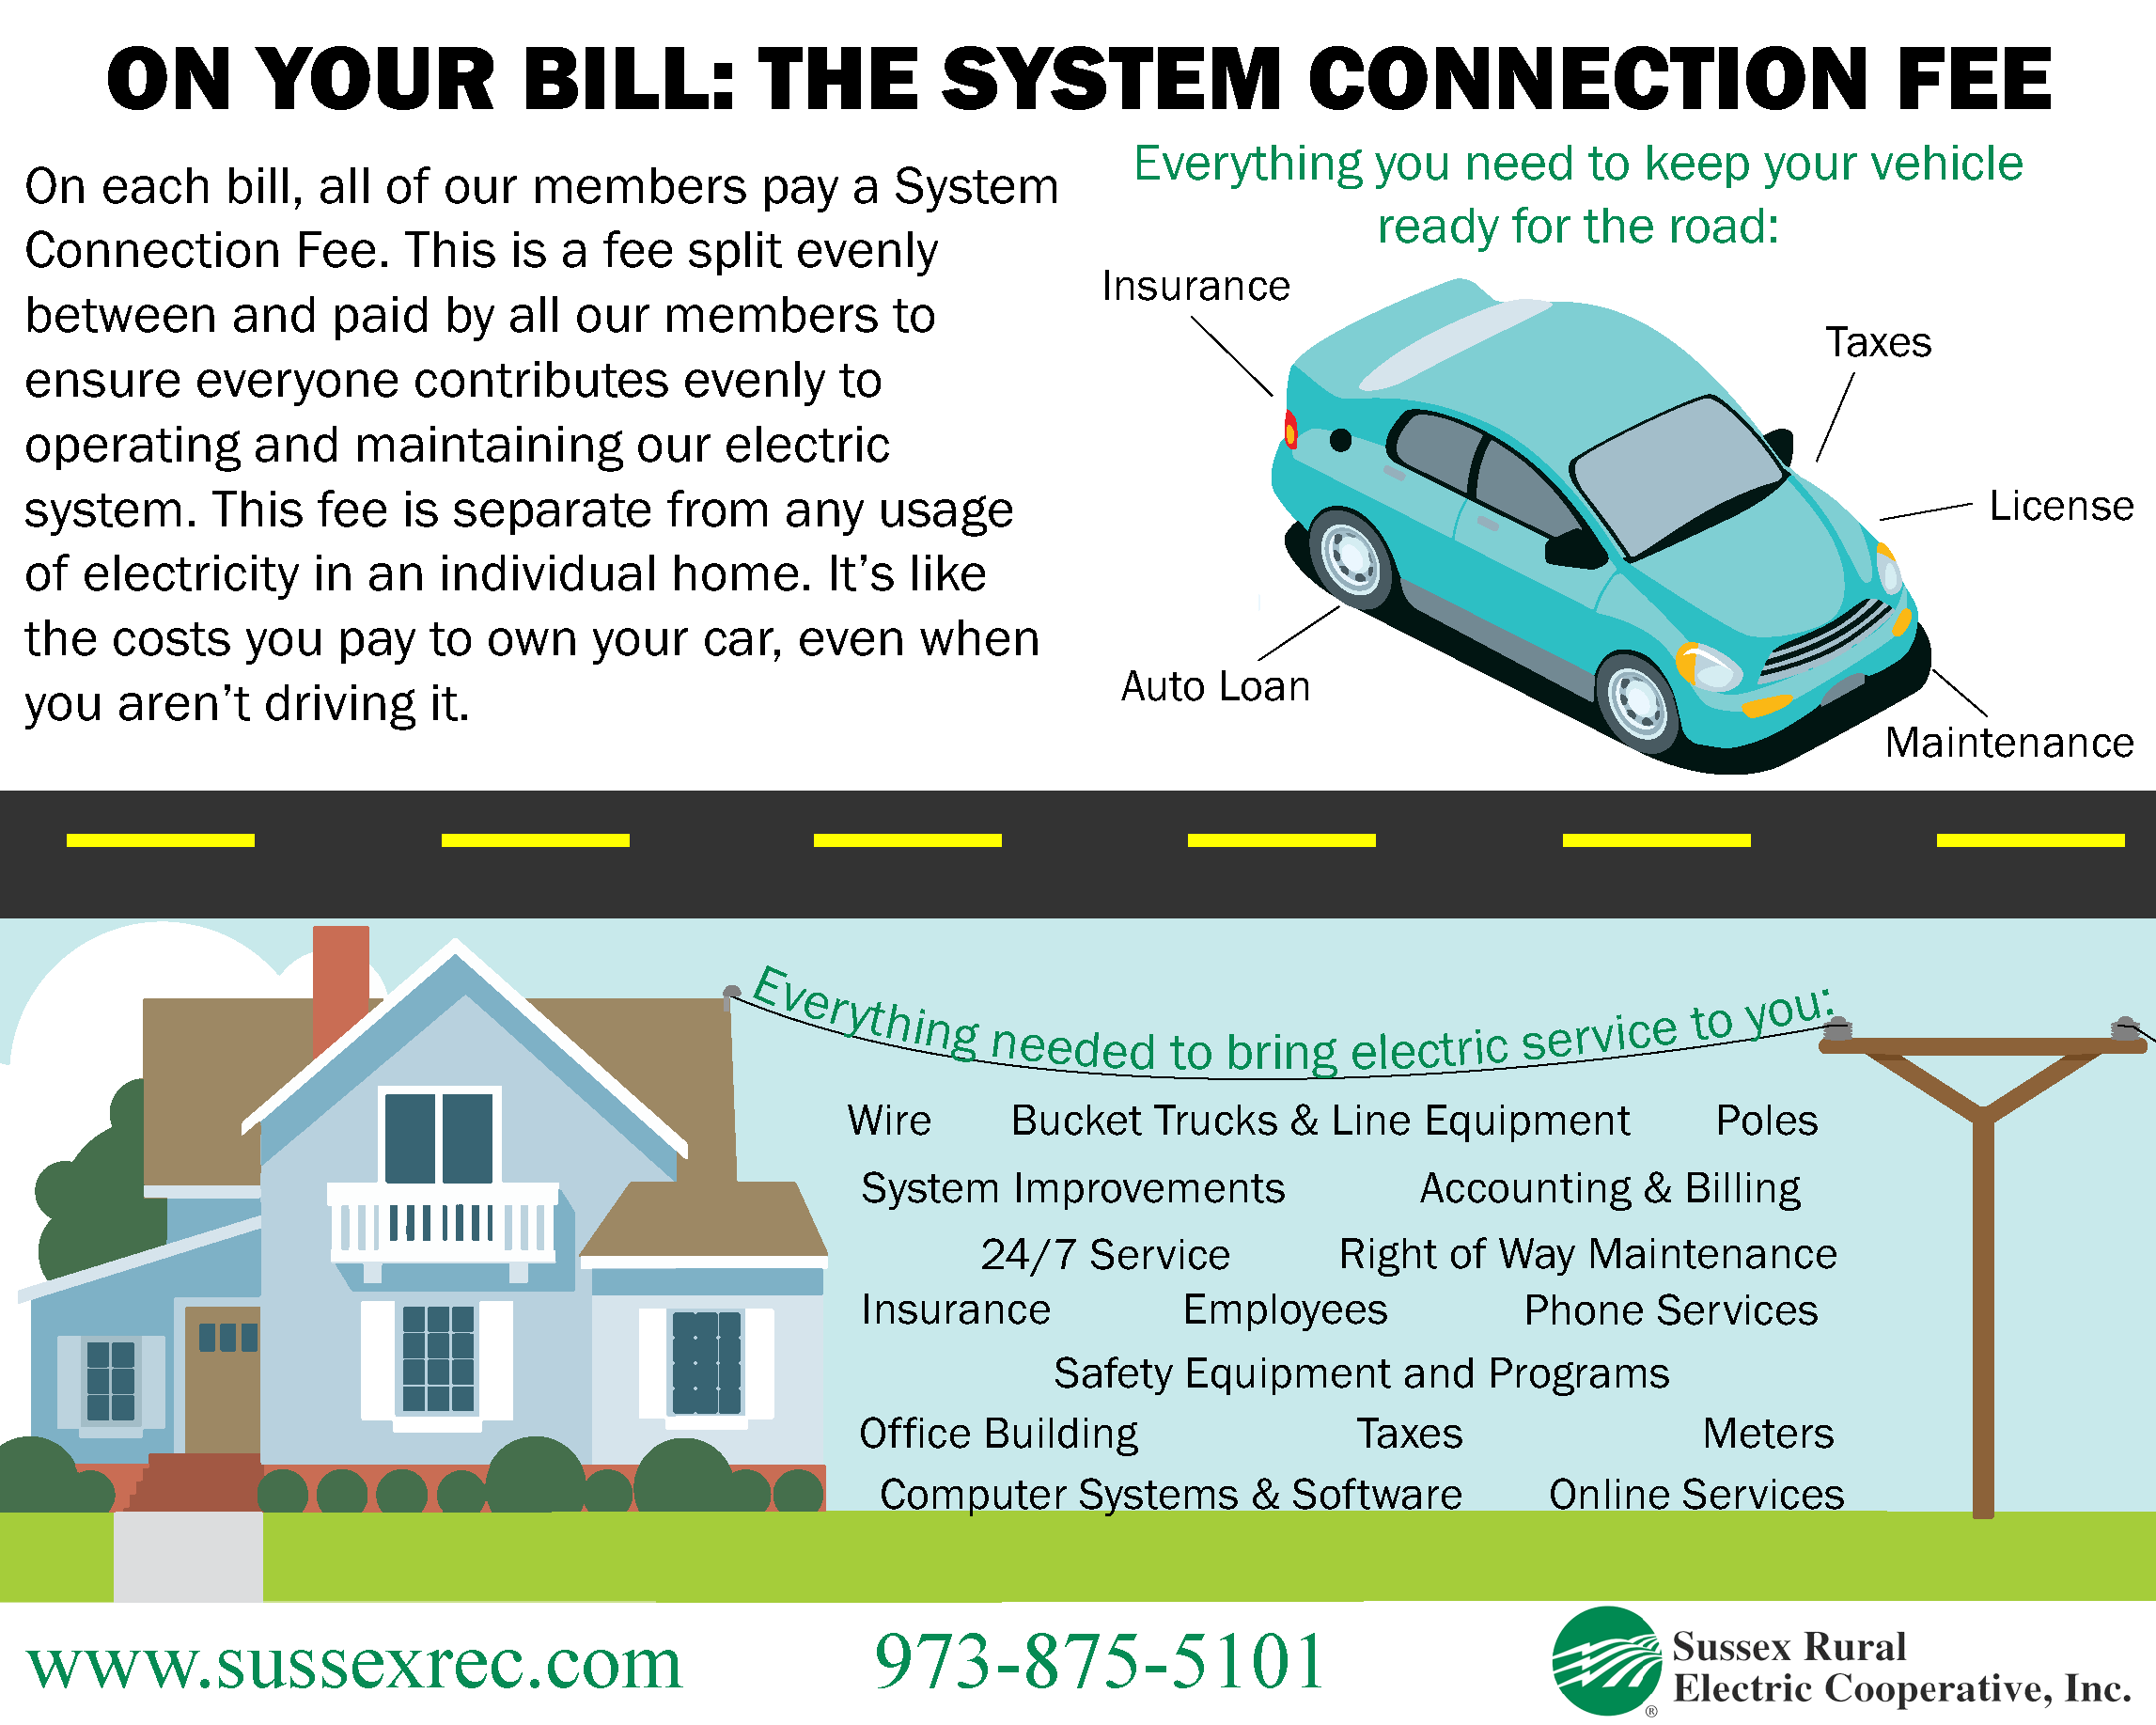 On Your Bill - The System Connection Fee